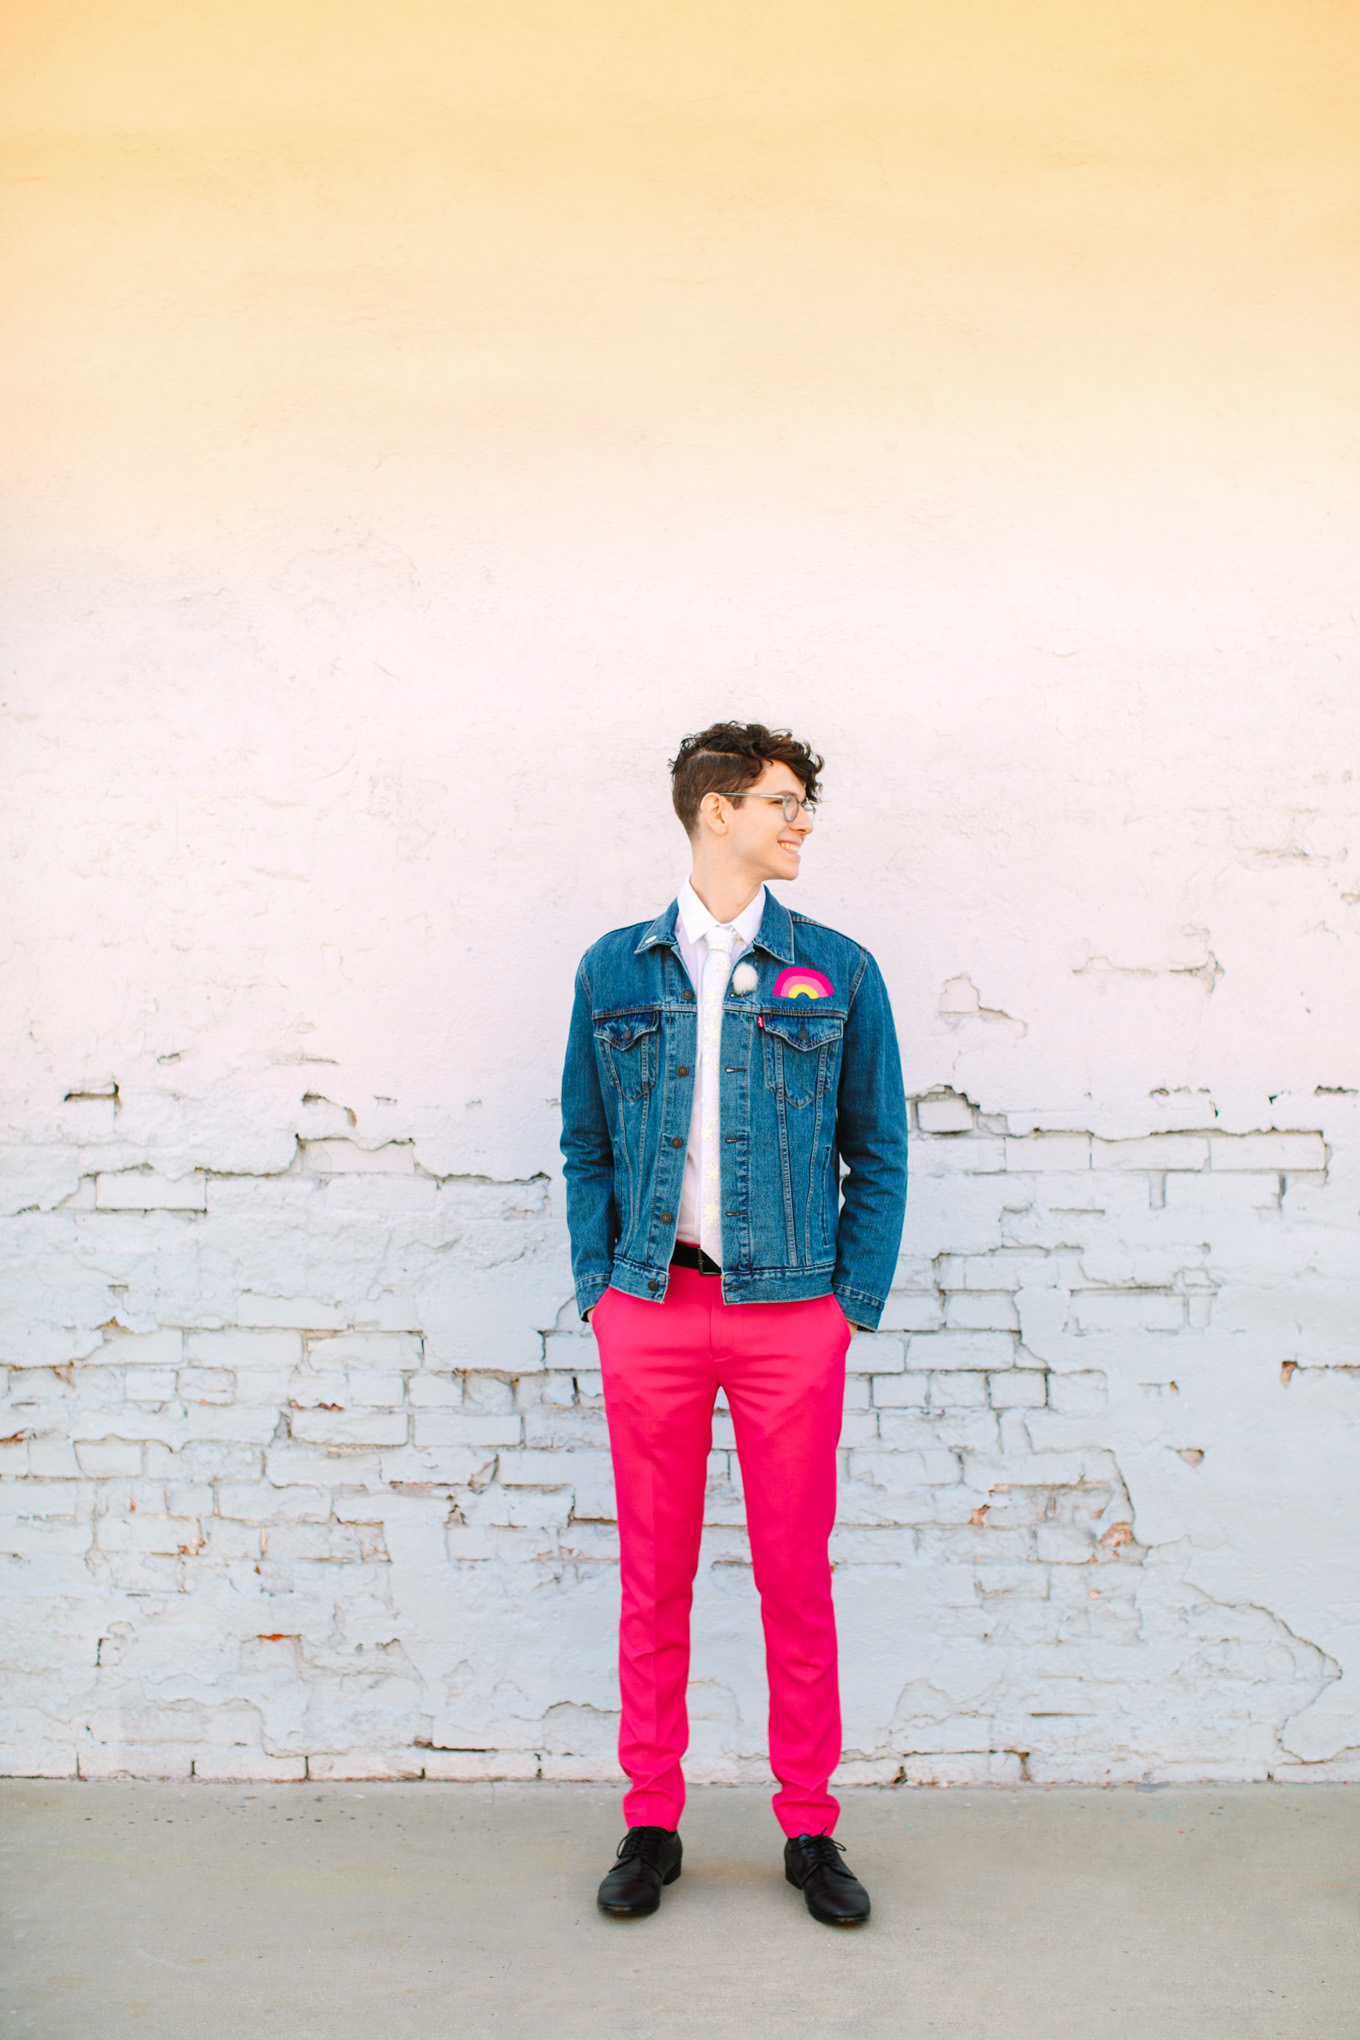 Groom in hot pink pants and denim jacket | Colorful wedding at The Unique Space Los Angeles published in The Knot Magazine | Fresh and colorful photography for fun-loving couples in Southern California | #colorfulwedding #losangeleswedding #weddingphotography #uniquespace Source: Mary Costa Photography | Los Angeles